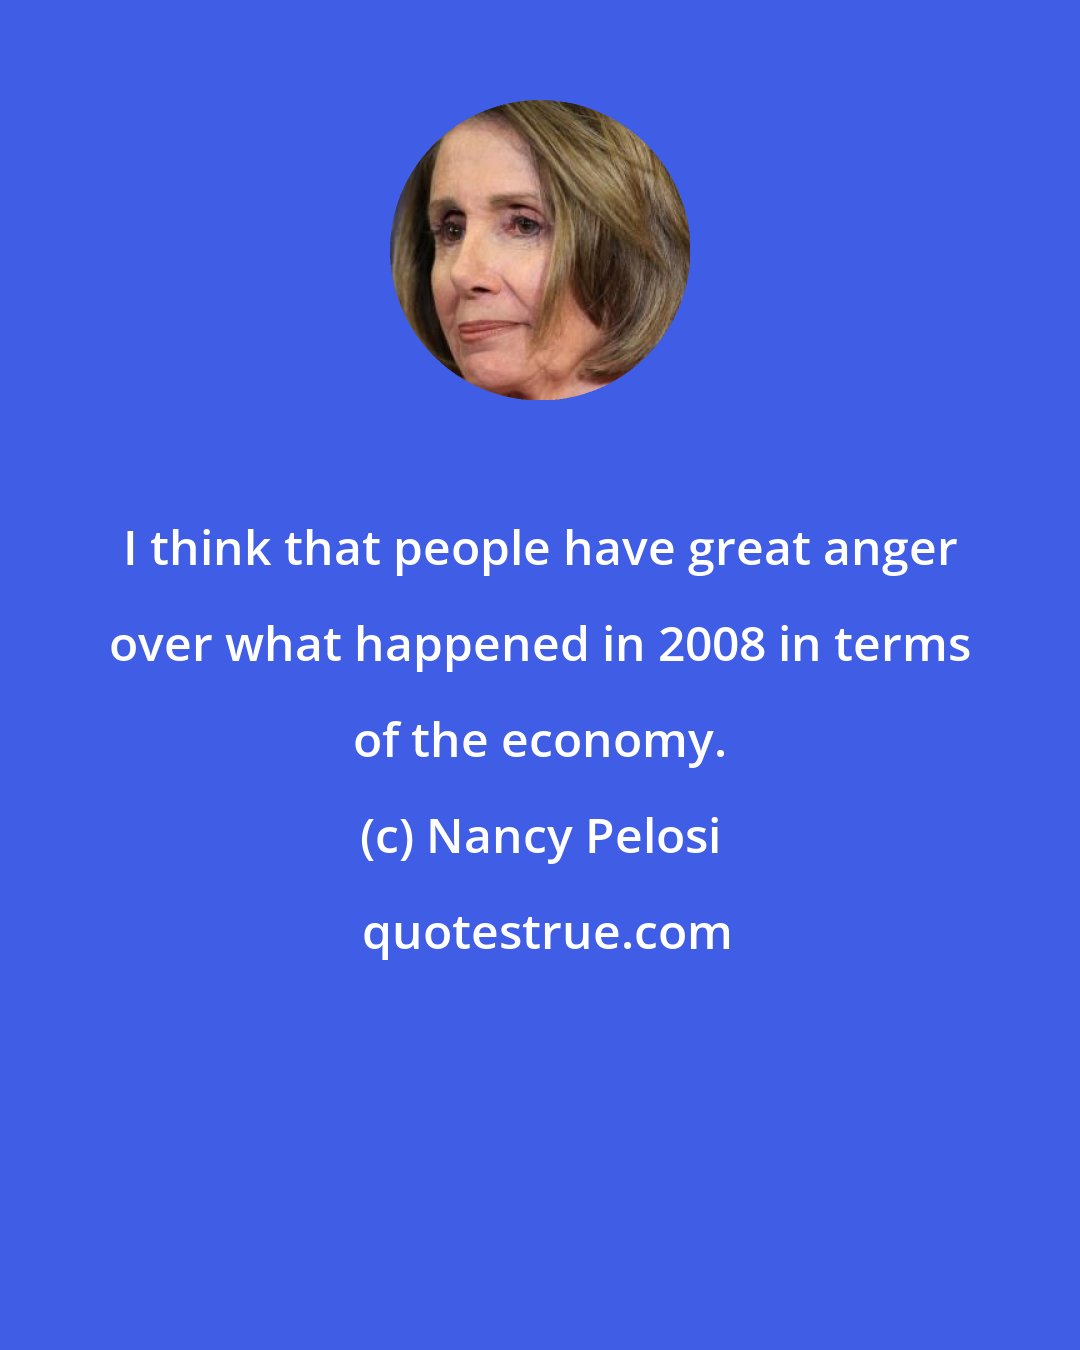 Nancy Pelosi: I think that people have great anger over what happened in 2008 in terms of the economy.